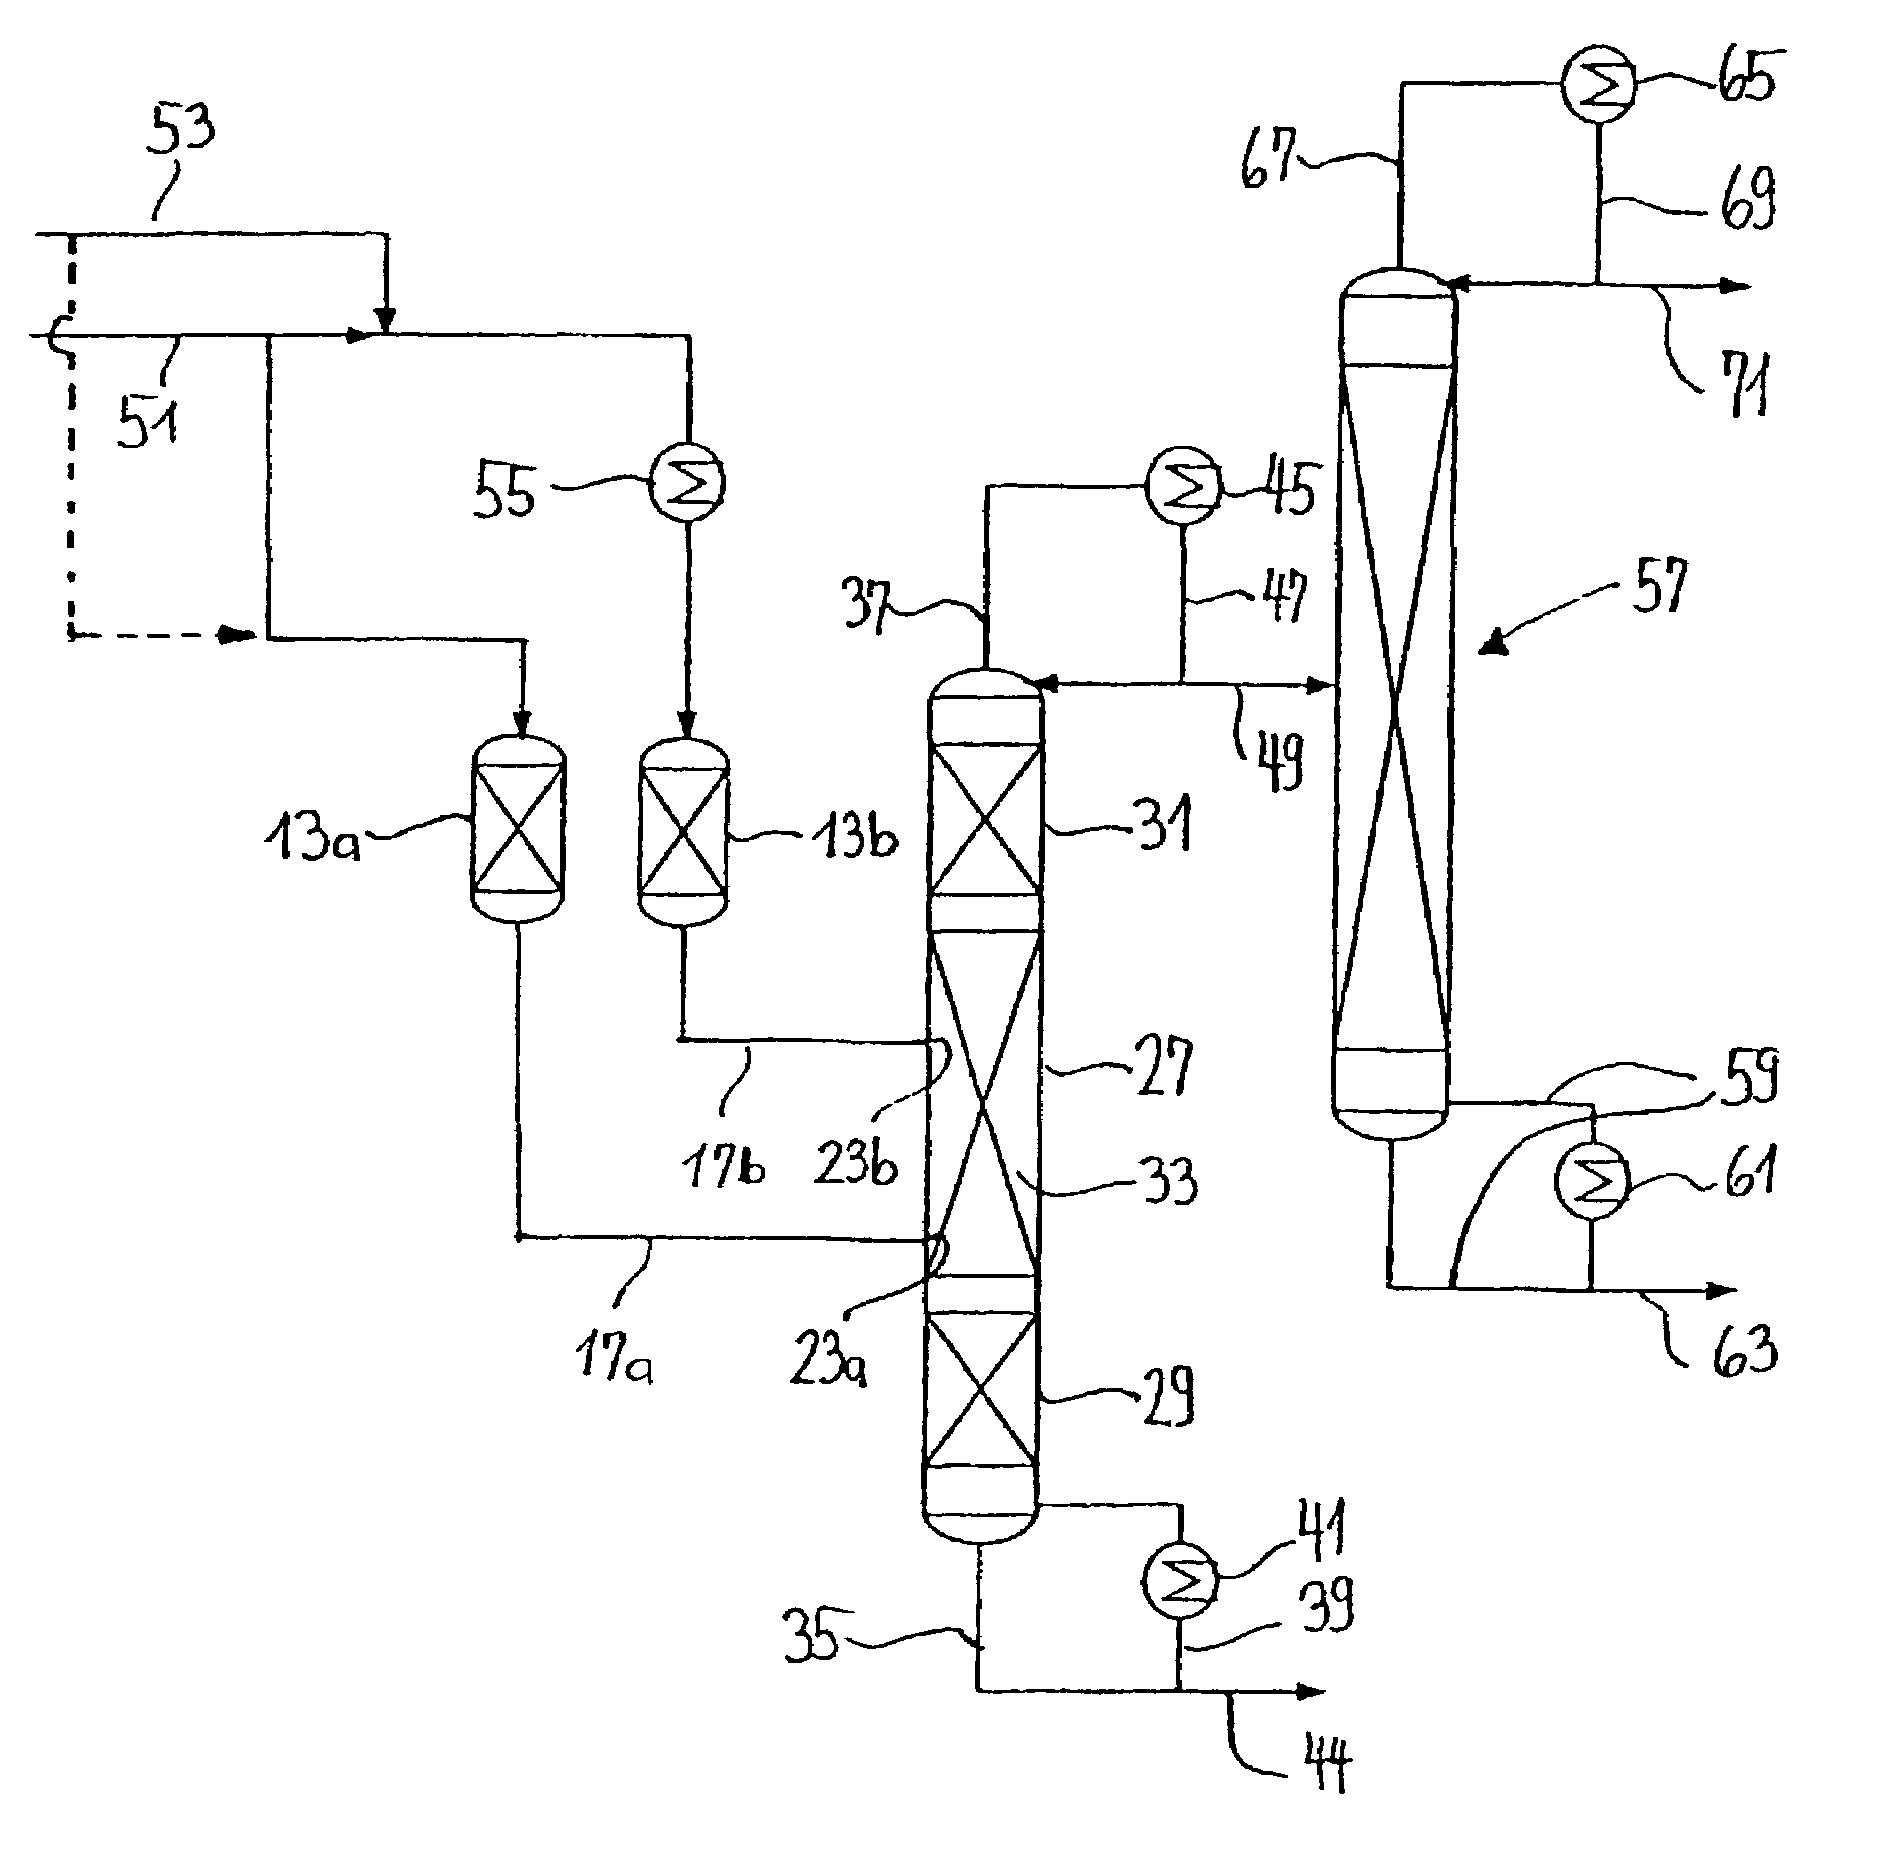 Process and device for hydrolytically obtaining a carboxylic acid alcohol from the corresponding carboxylate